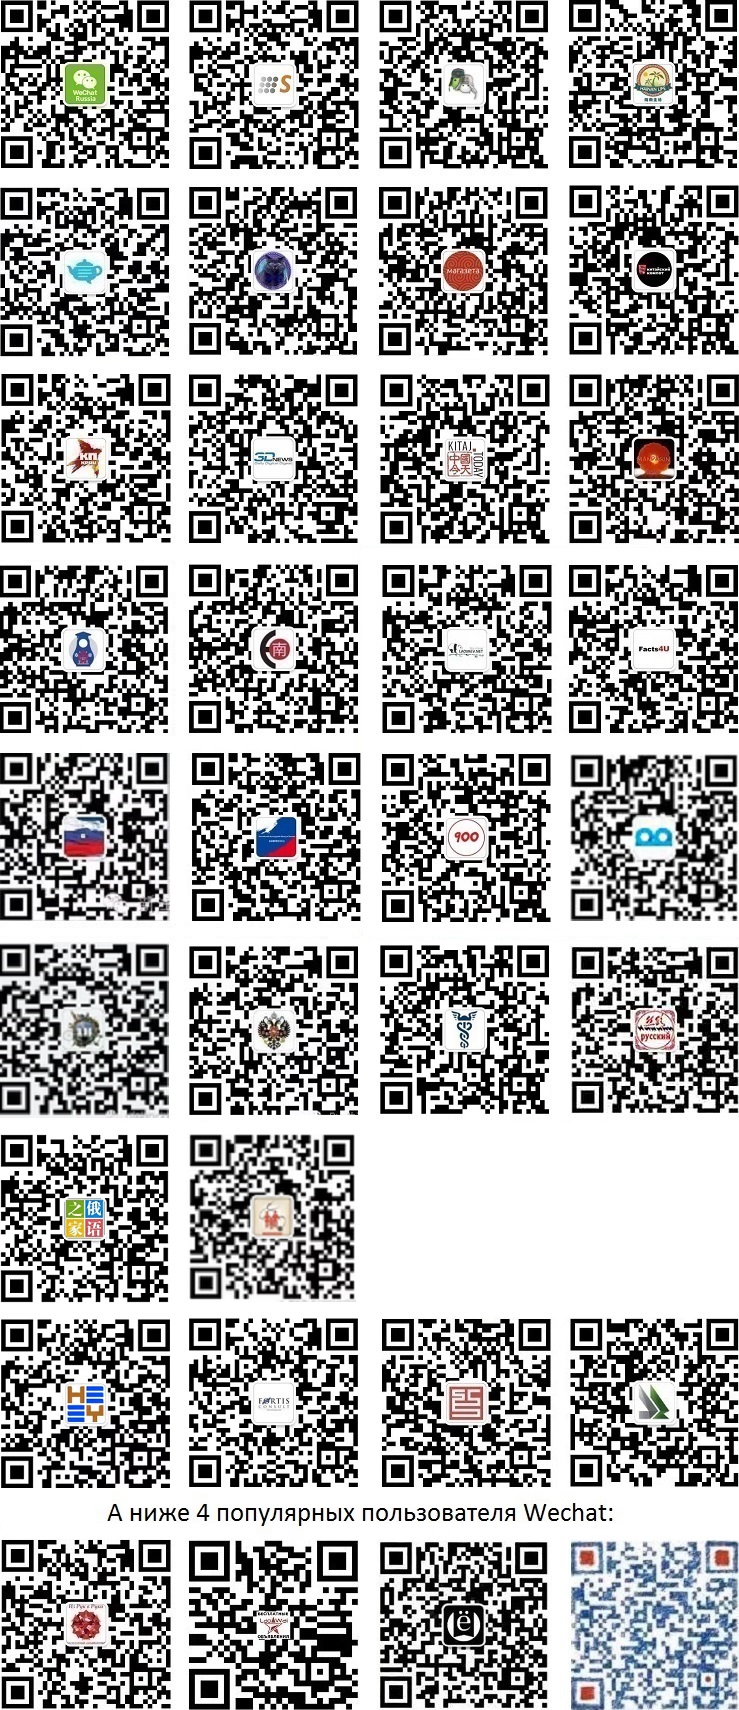 !!!Russian official account Wechat